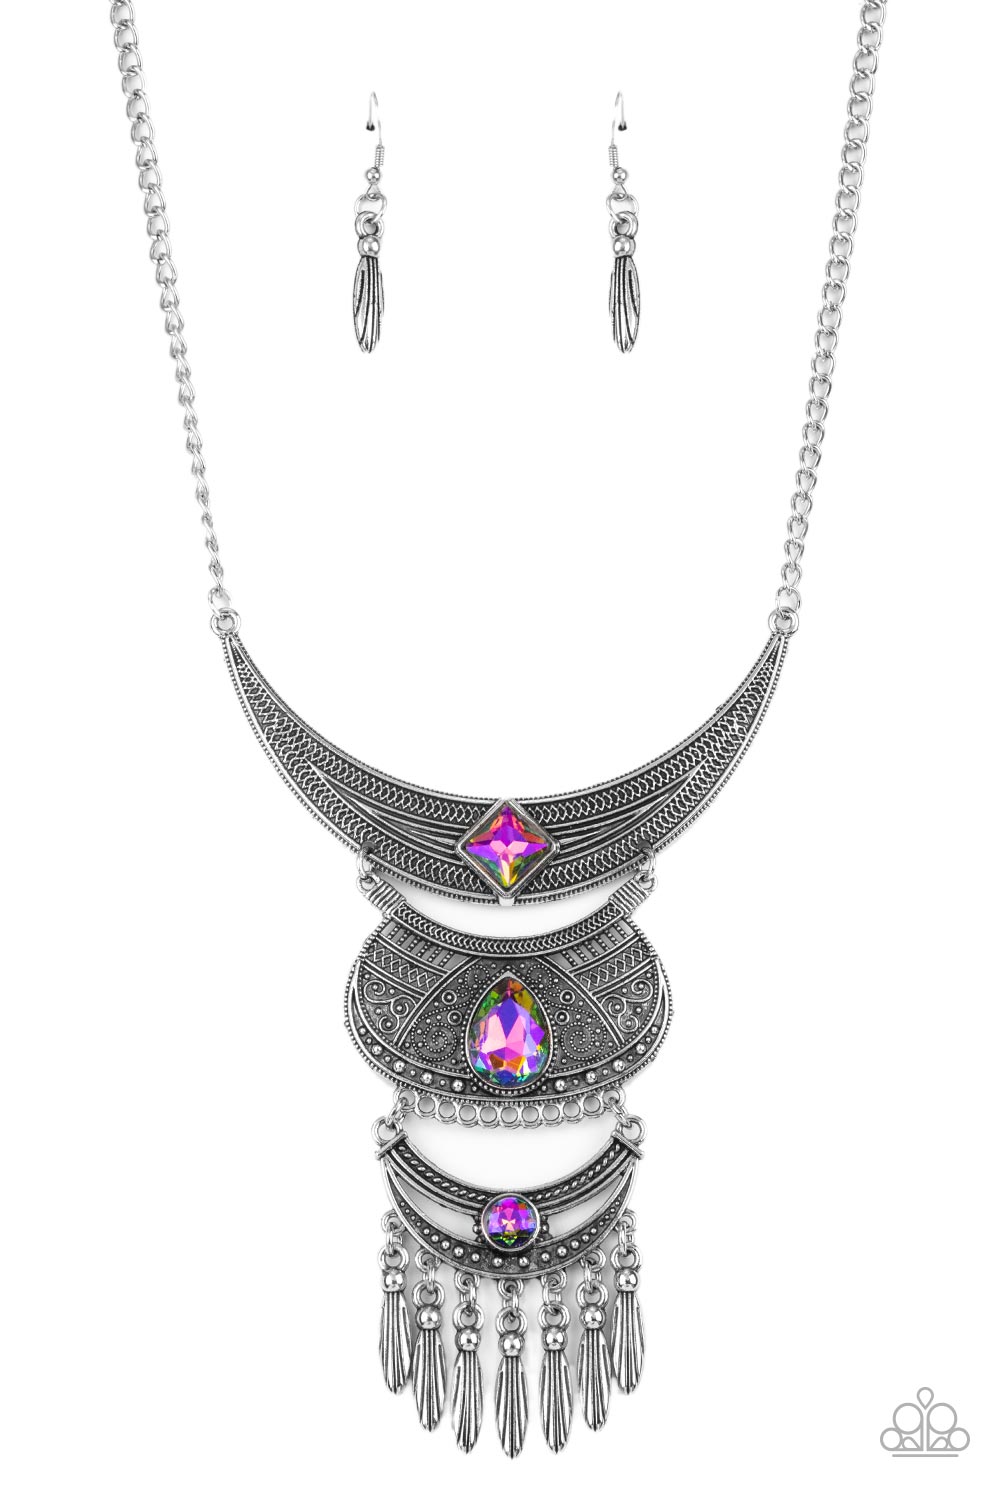 Lunar Enchantment Multi UV Shimmer Rhinestone and Silver Necklace - Paparazzi Accessories - lightbox -CarasShop.com - $5 Jewelry by Cara Jewels